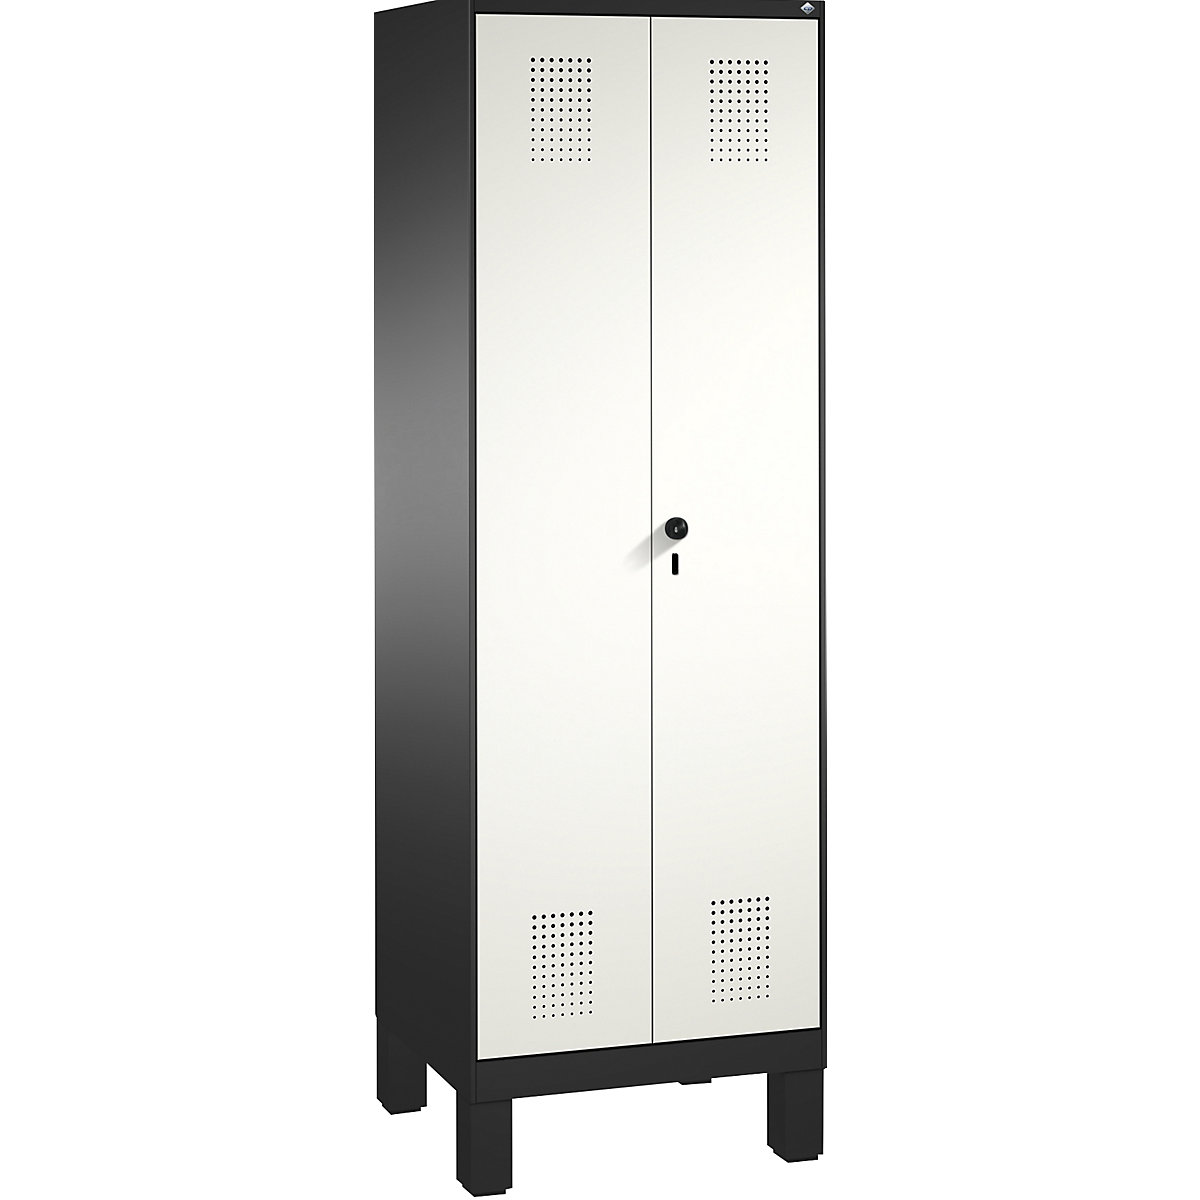 EVOLO laundry cupboard / cloakroom locker – C+P, 4 shelves, clothes rail, compartments 2 x 300 mm, with feet, black grey / traffic white-12